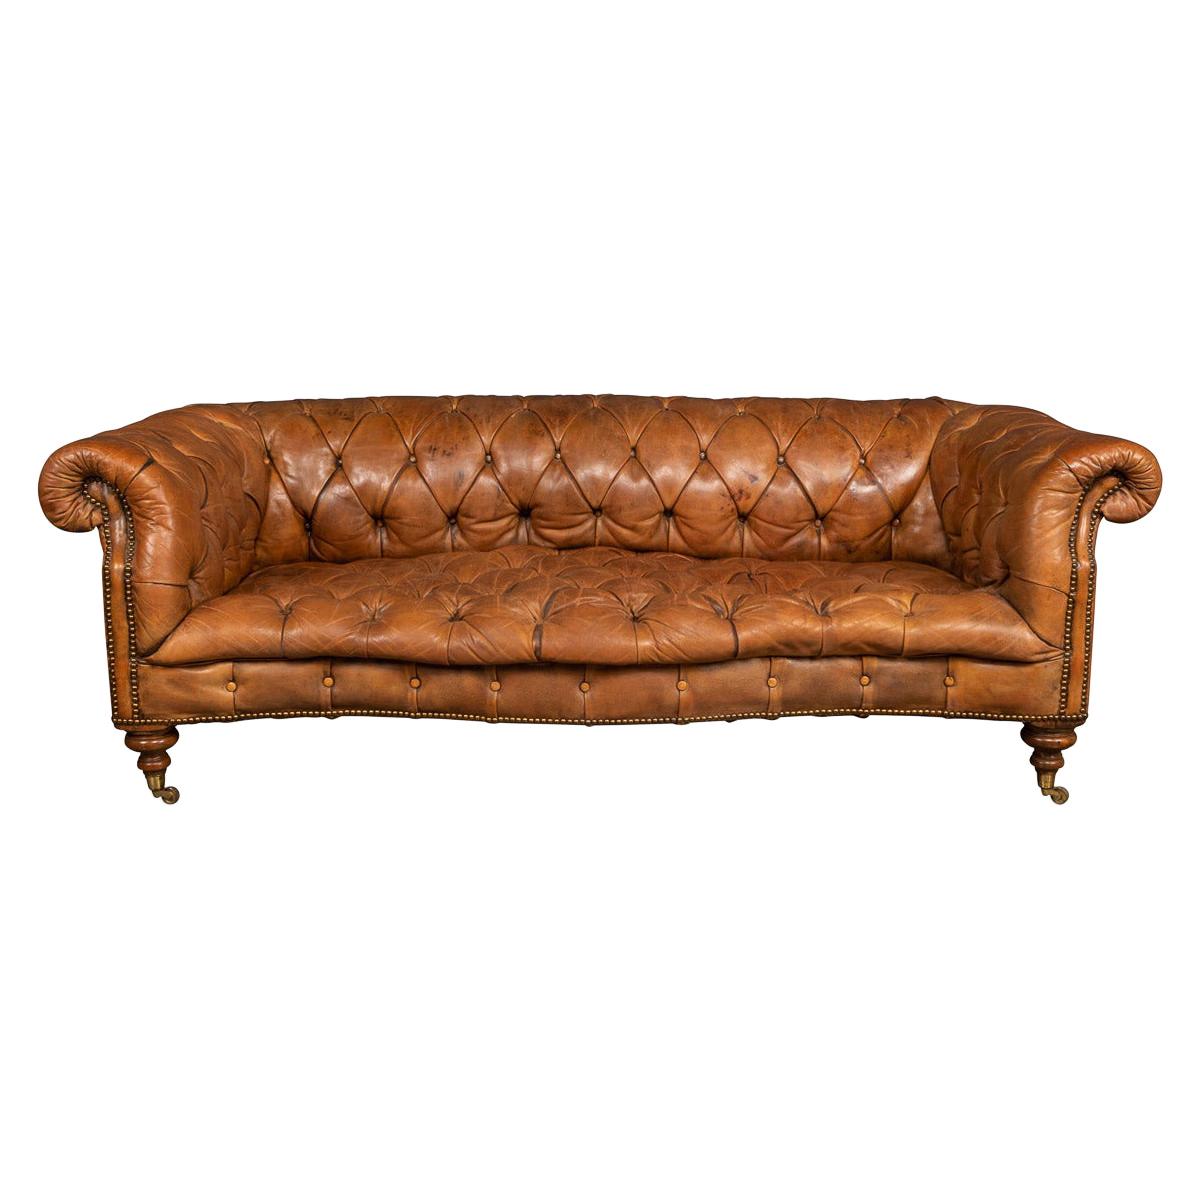 20th Century Chesterfield Brown Leather Sofa with Button Down Seats, 1910s